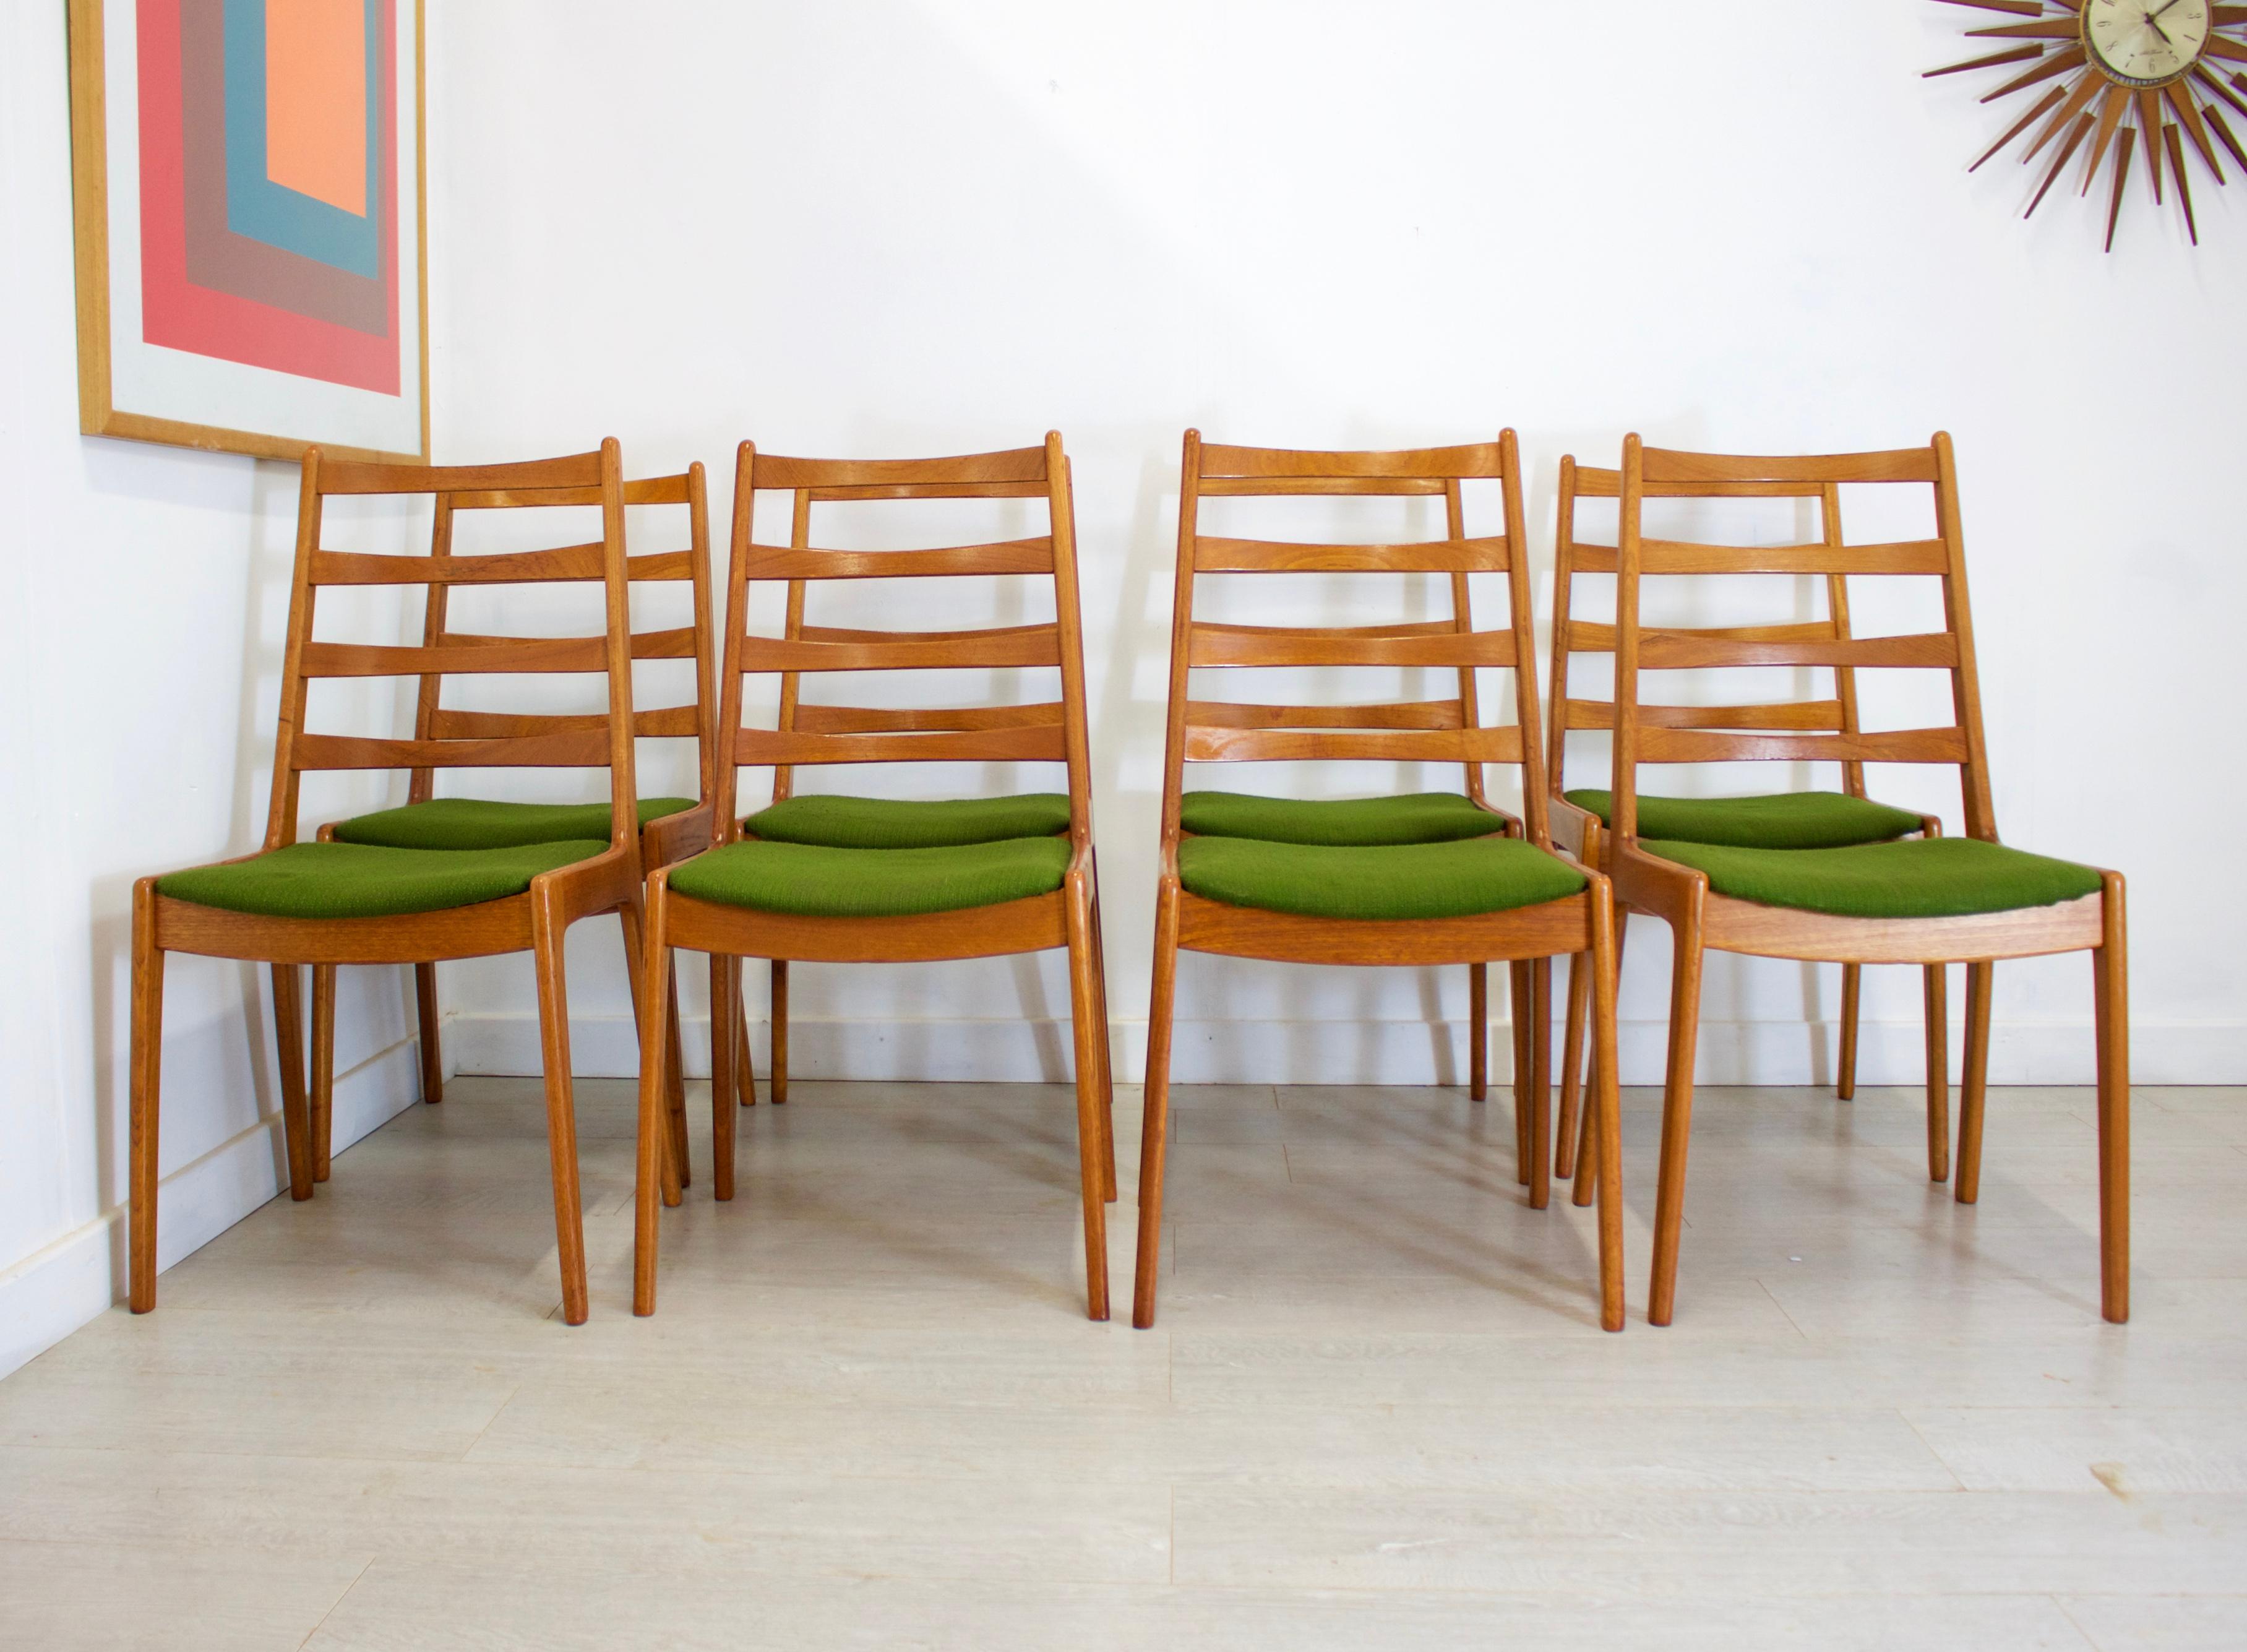 Midcentury Danish design

- Mid-Century Modern set of 8 dining chairs
- Made in Denmark by Farso Stolefabrik
- Featuring a green upholstery (not original)
- Made from teak.